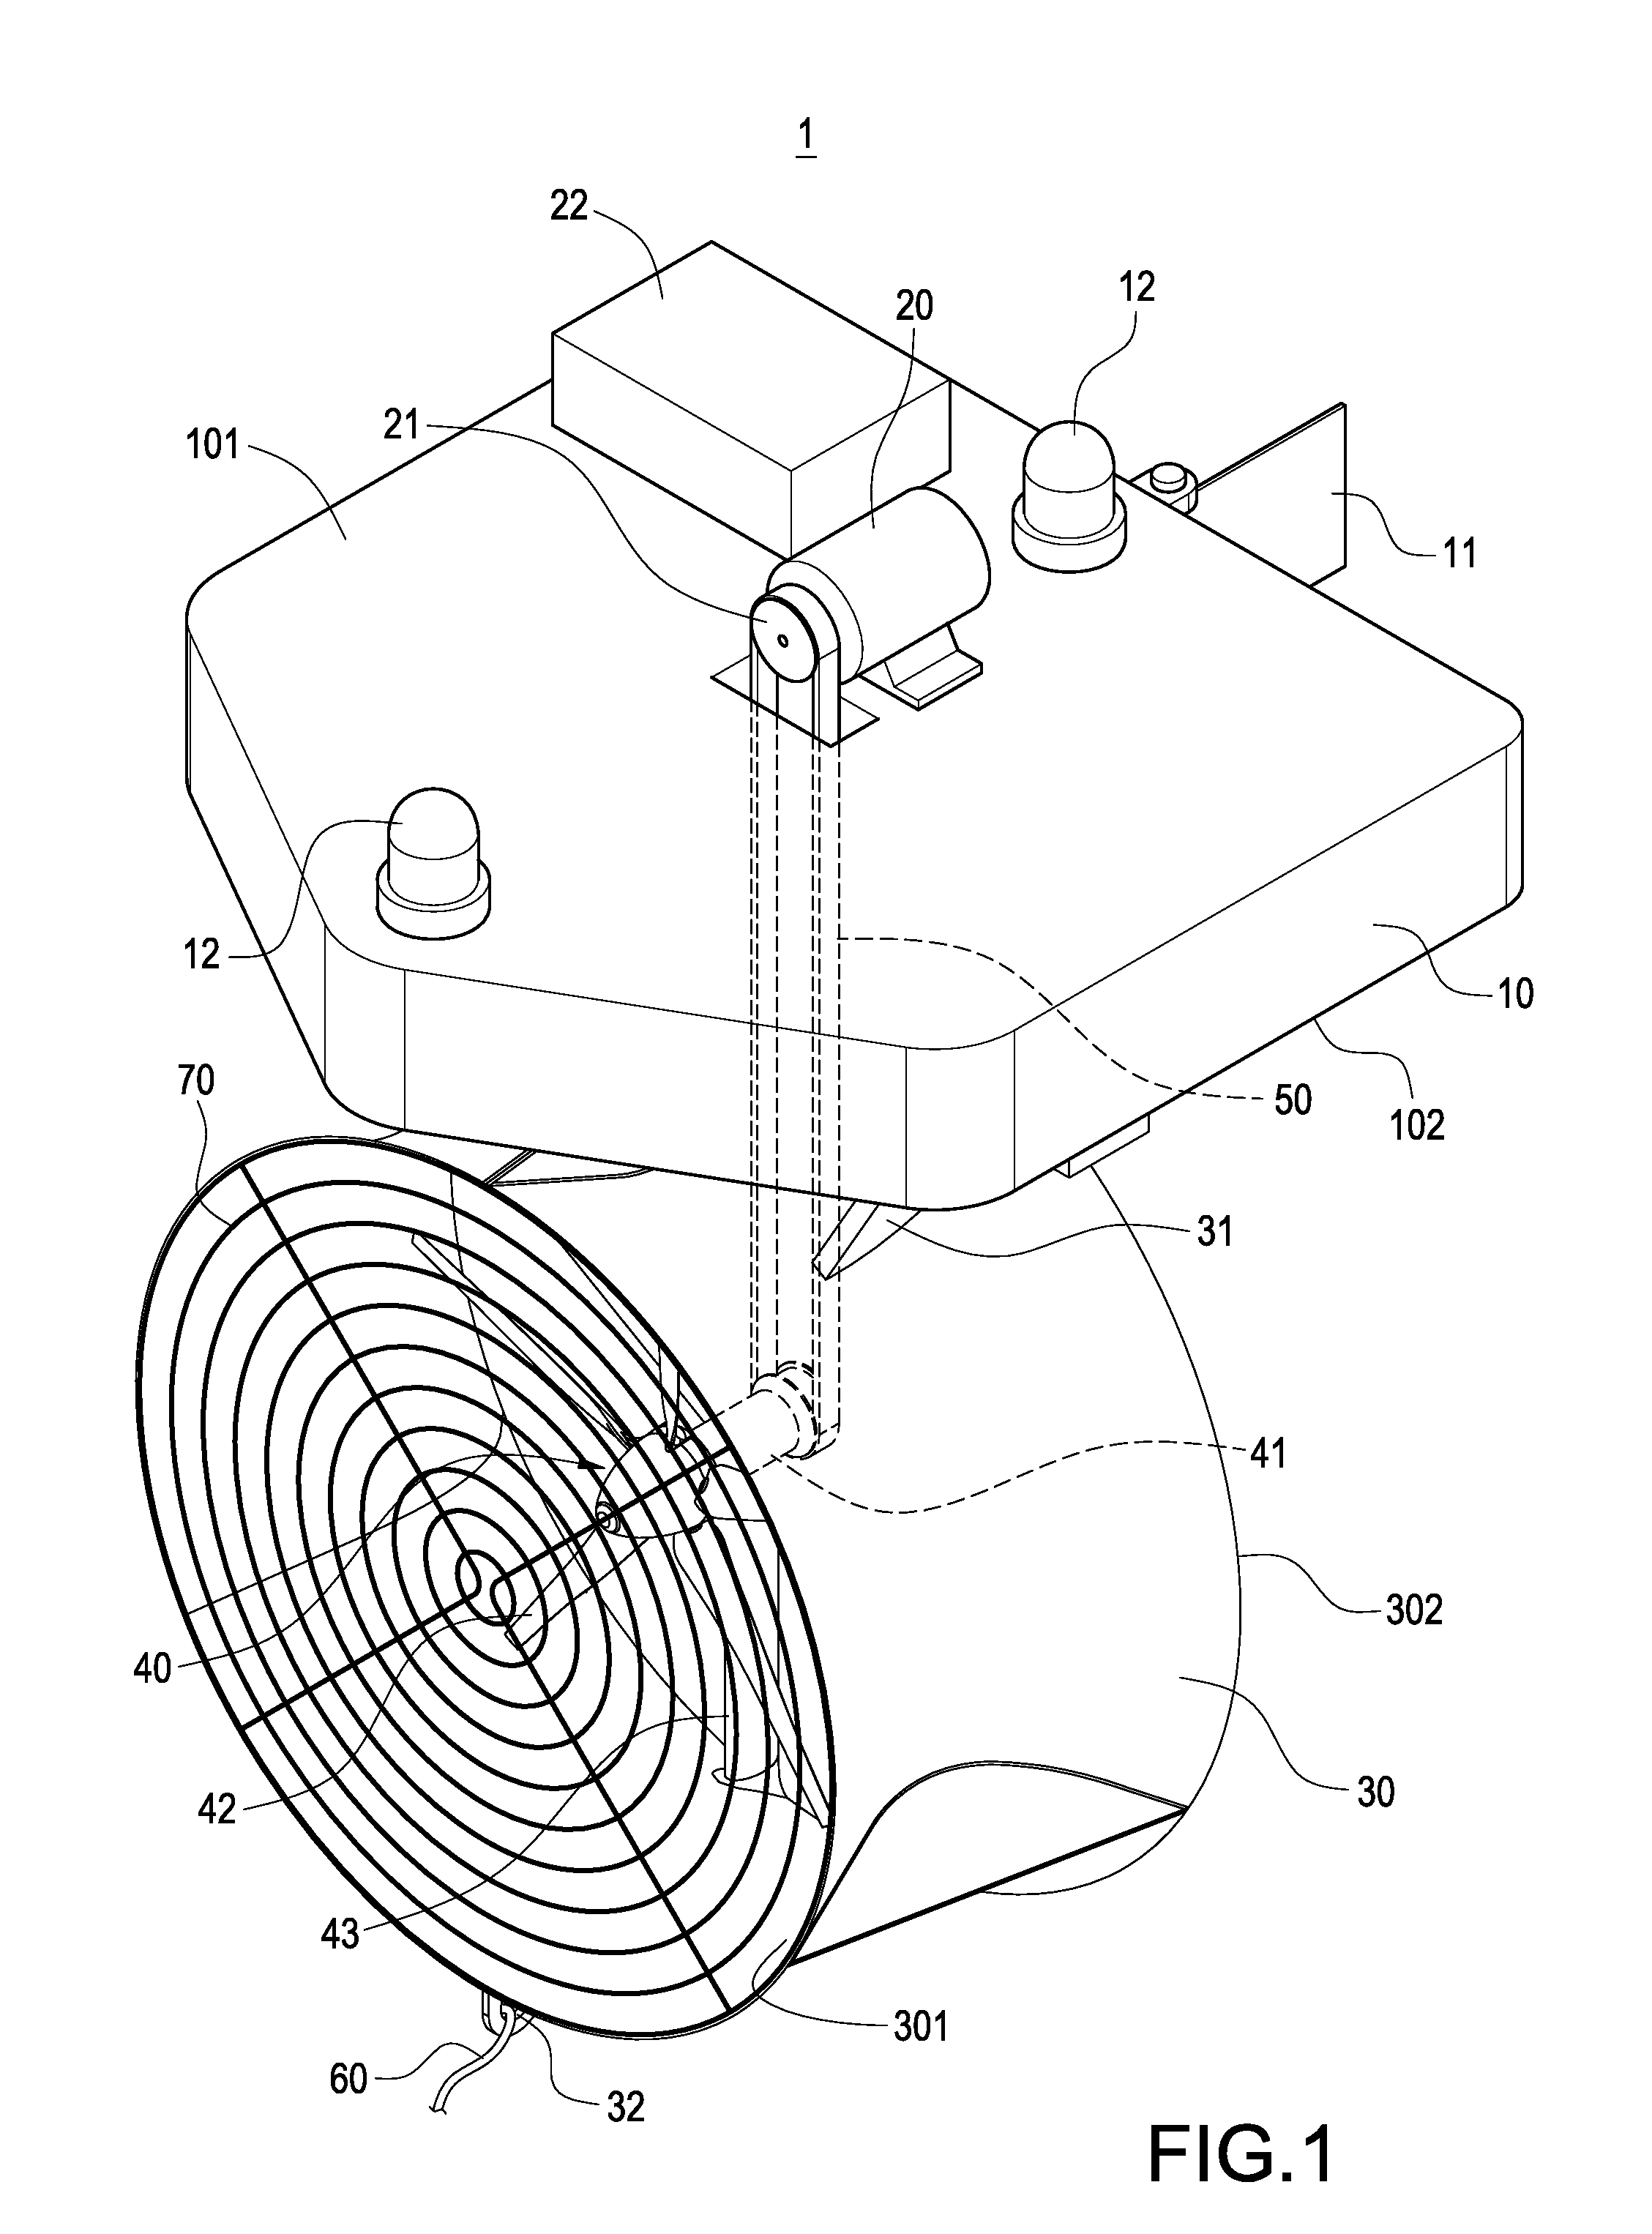 Run-of-river hydroelectric power generation apparatus